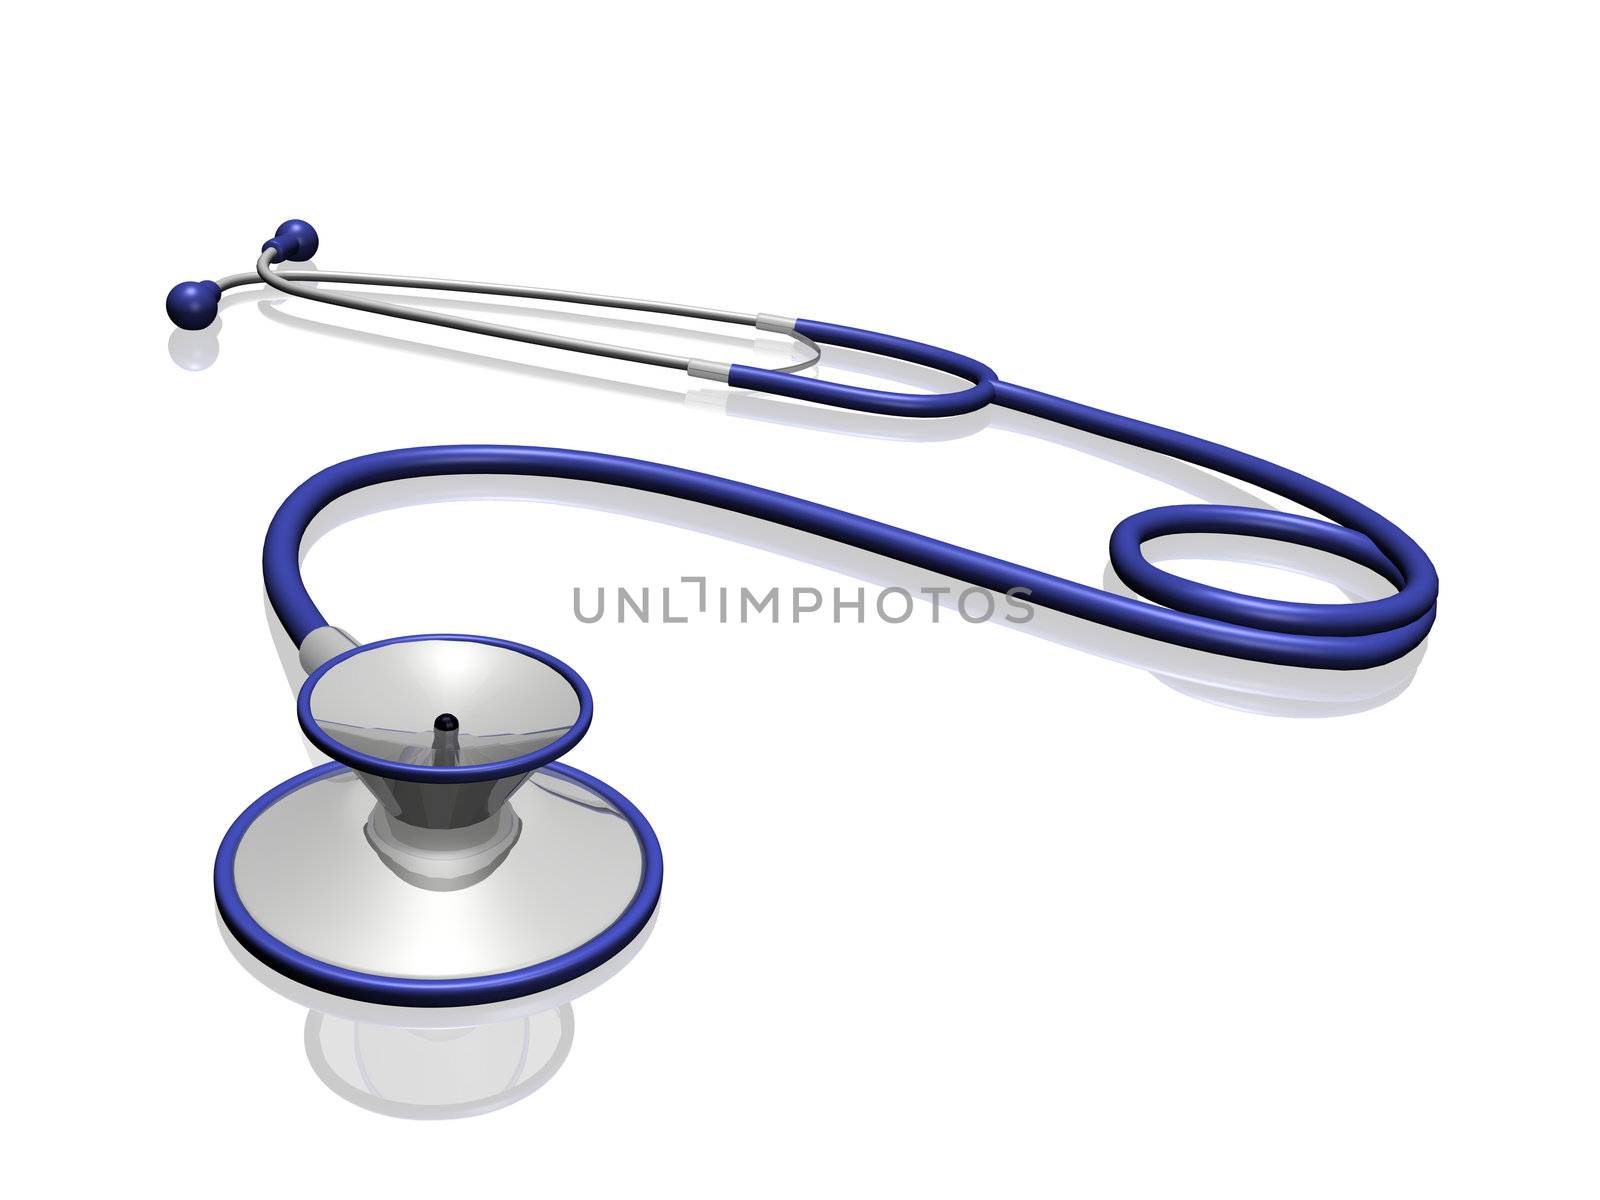 A blue and silver stethoscope modelled in a 3D program.